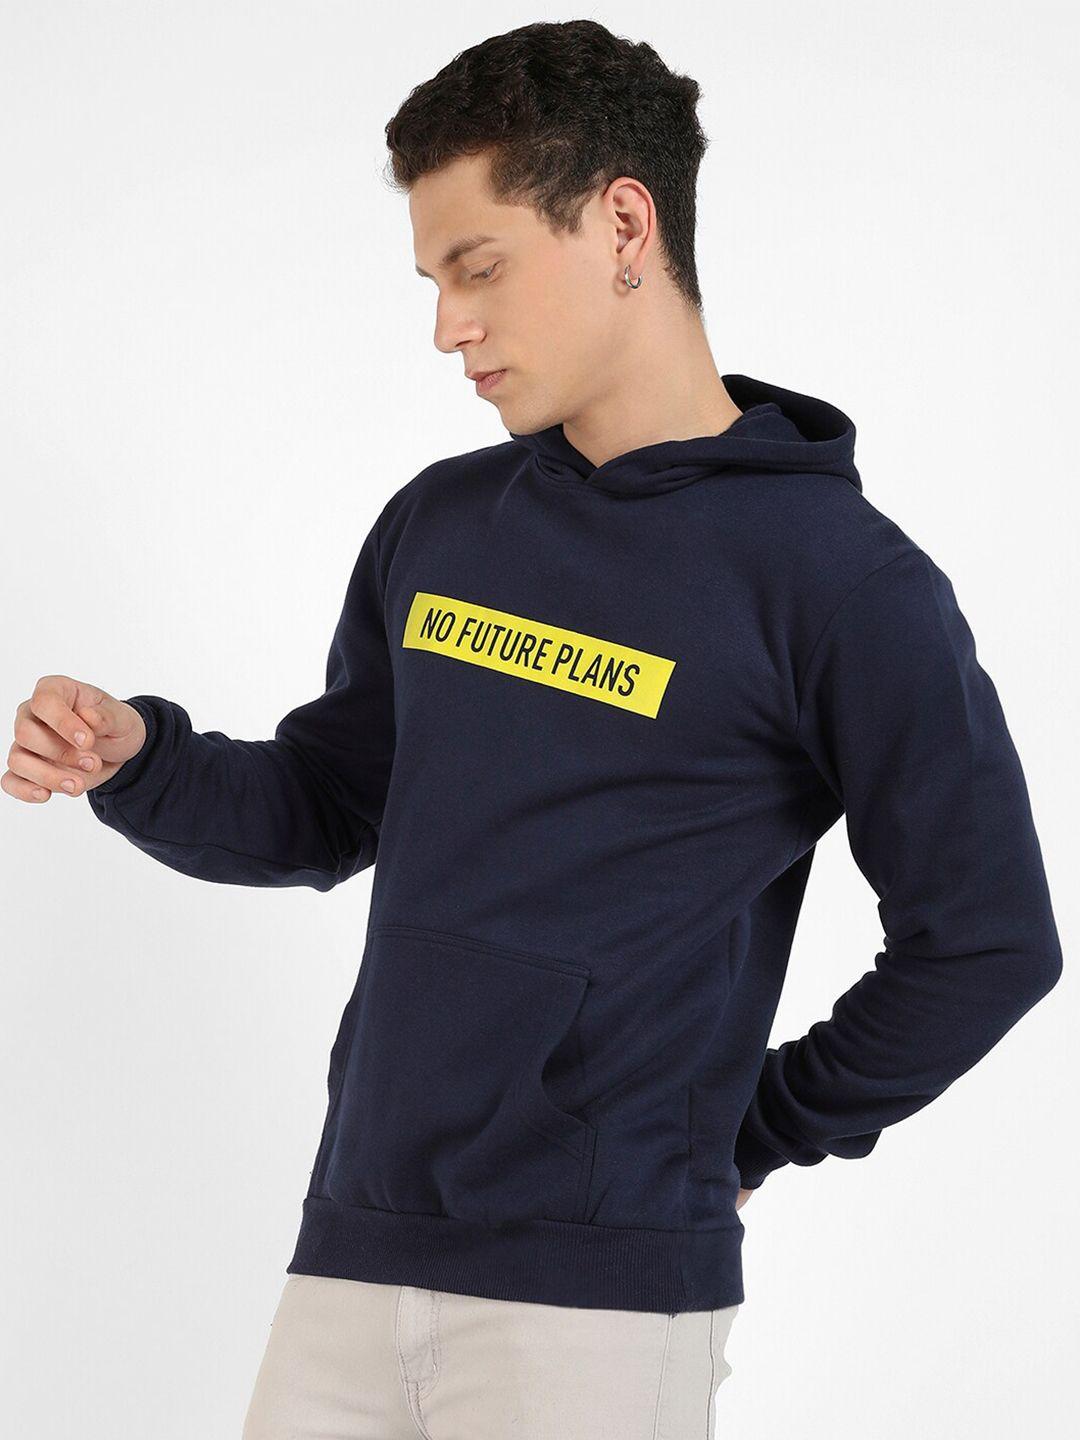 campus sutra typography printed hooded pure cotton pullover sweatshirt